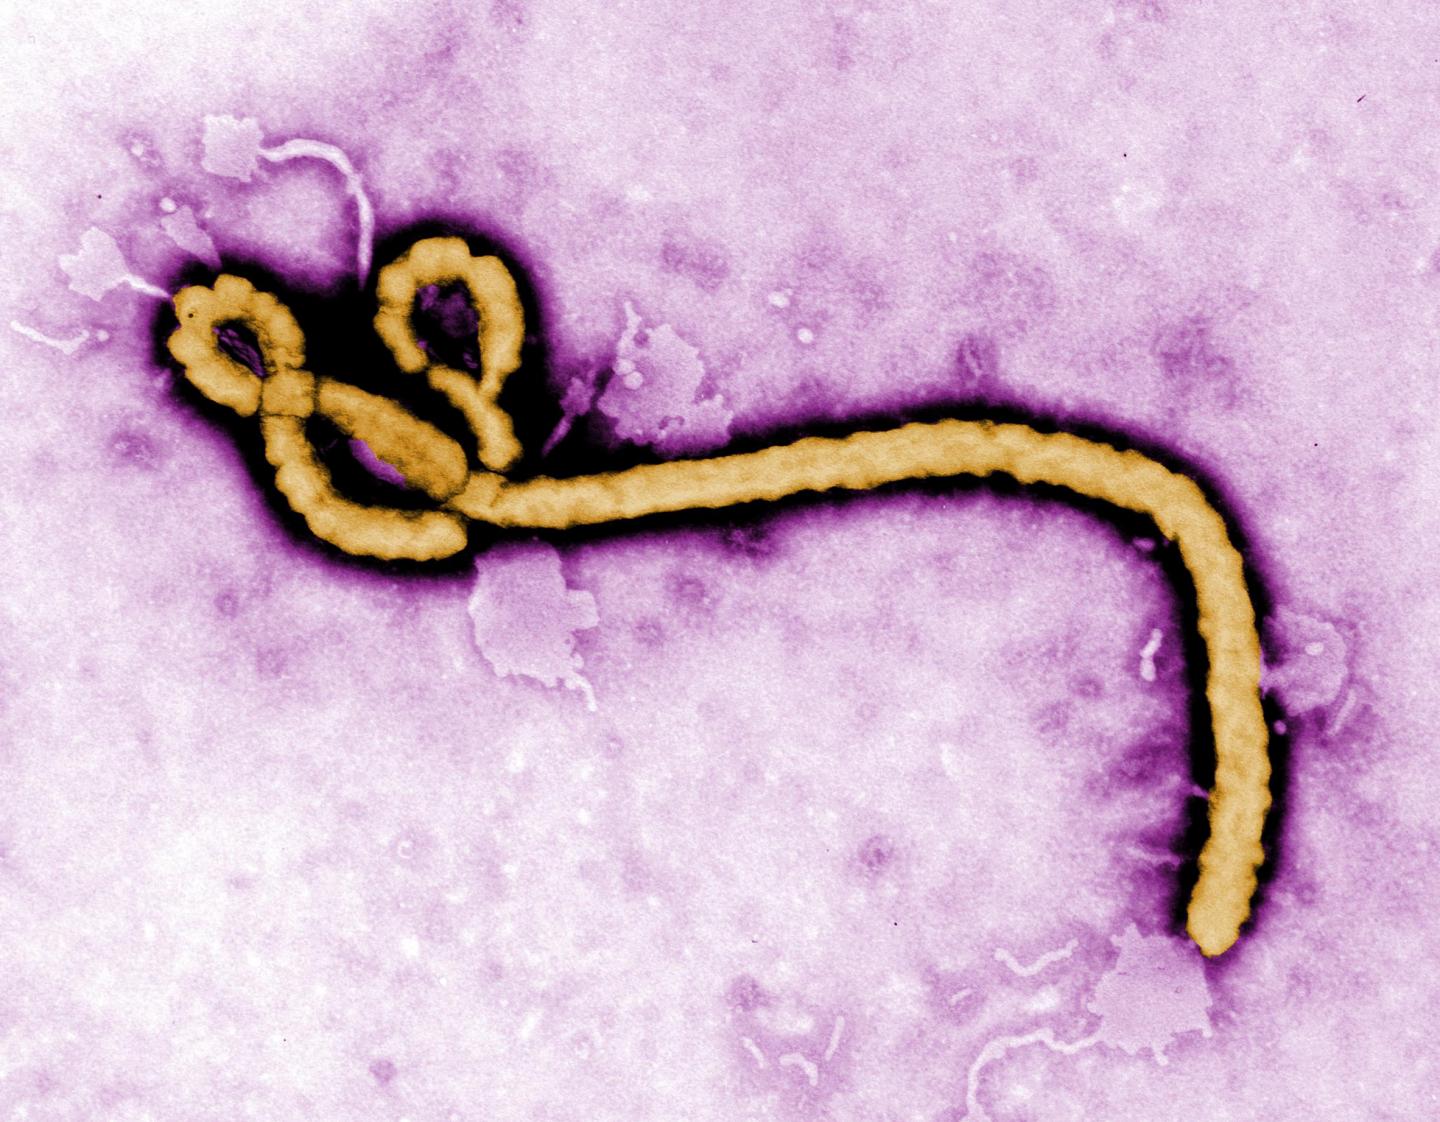 Created by CDC microbiologist Frederick A Murphy, this colourised transmission electron micrograph (TEM) reveals some of the ultrastructural morphology displayed by an Ebola virus virion